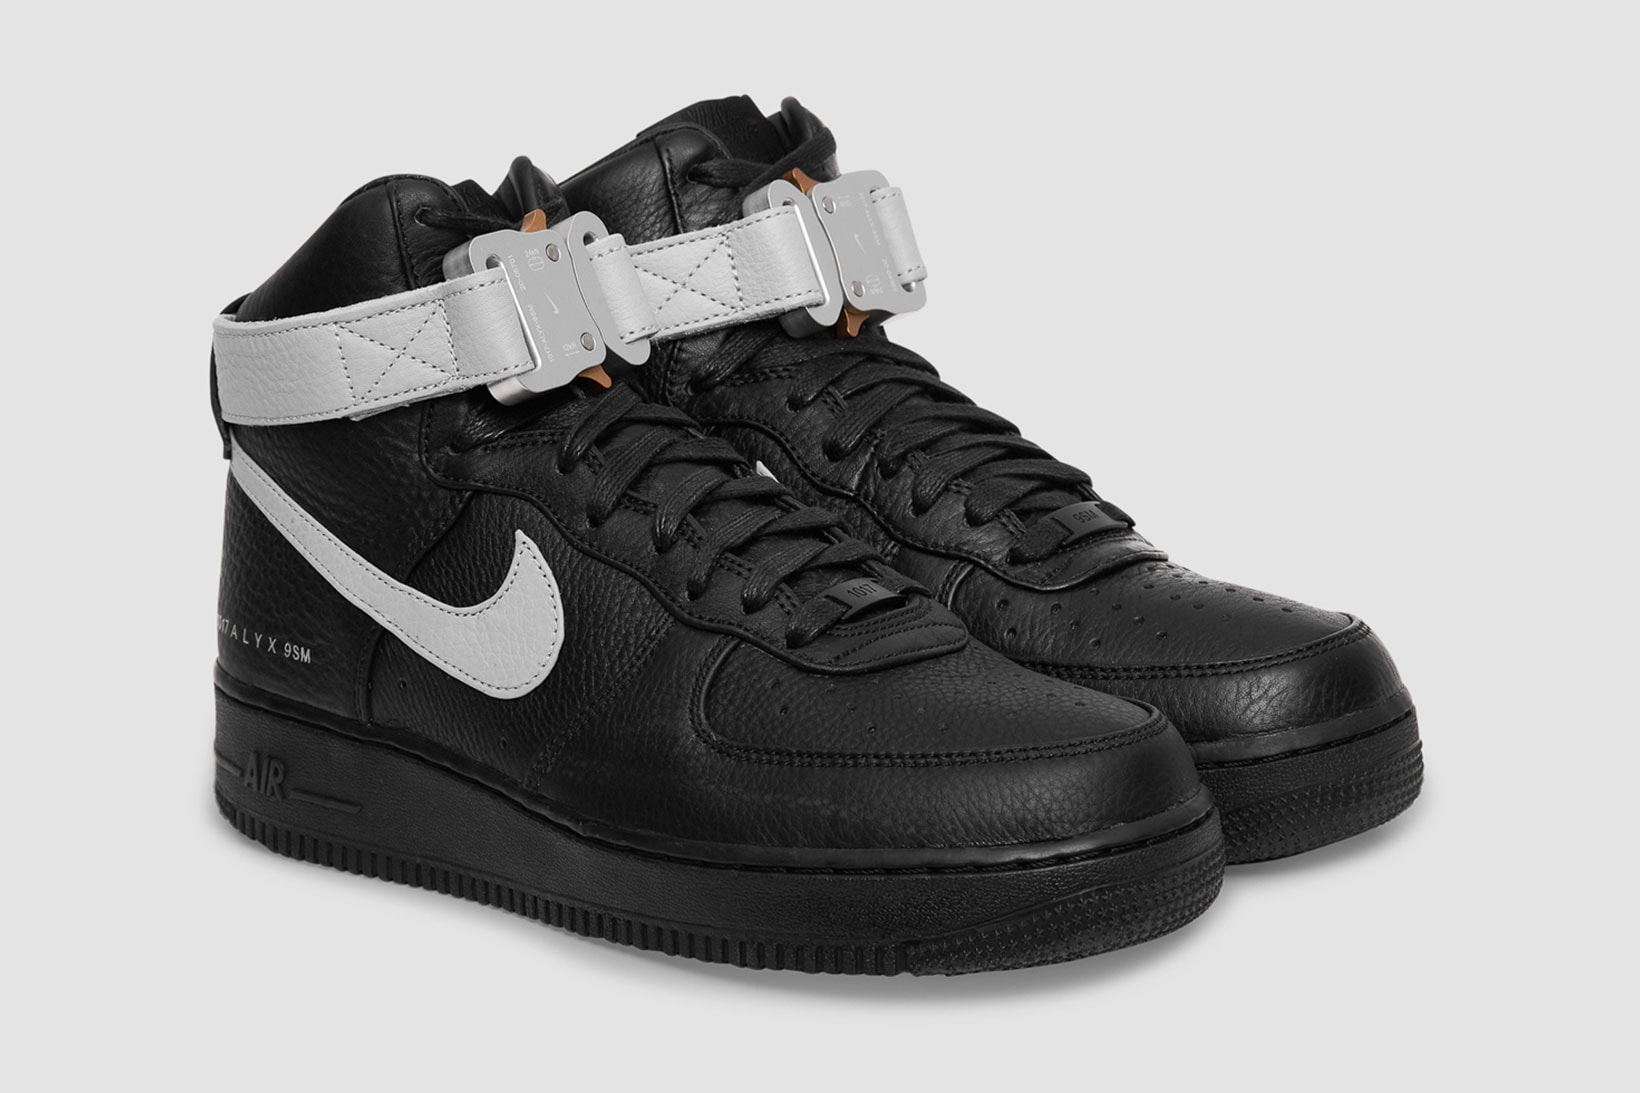 1017 alyx 9sm nike air force 1 af1 black gray official look rollercoaster buckle